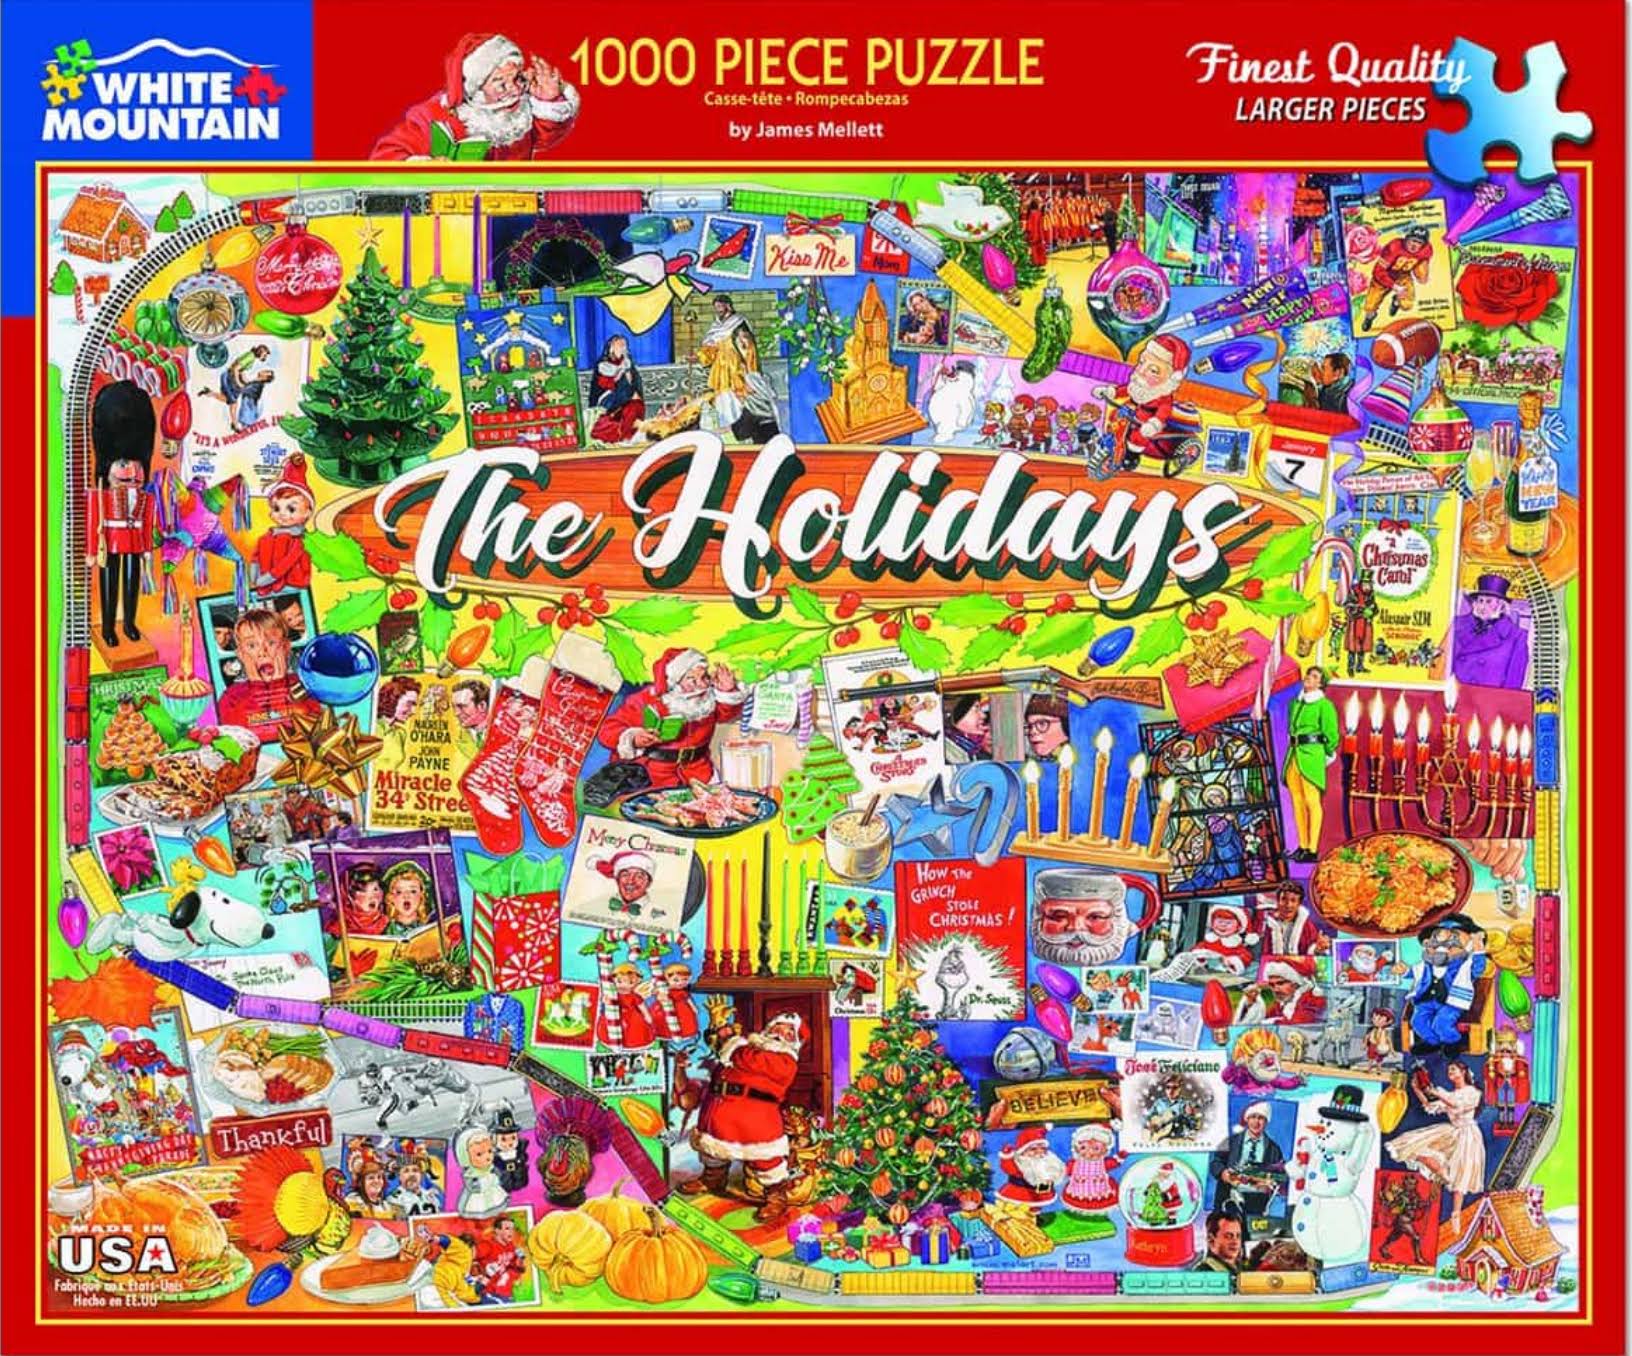 White Mountain Puzzles The Holidays - 1000 Piece Jigsaw Puzzle